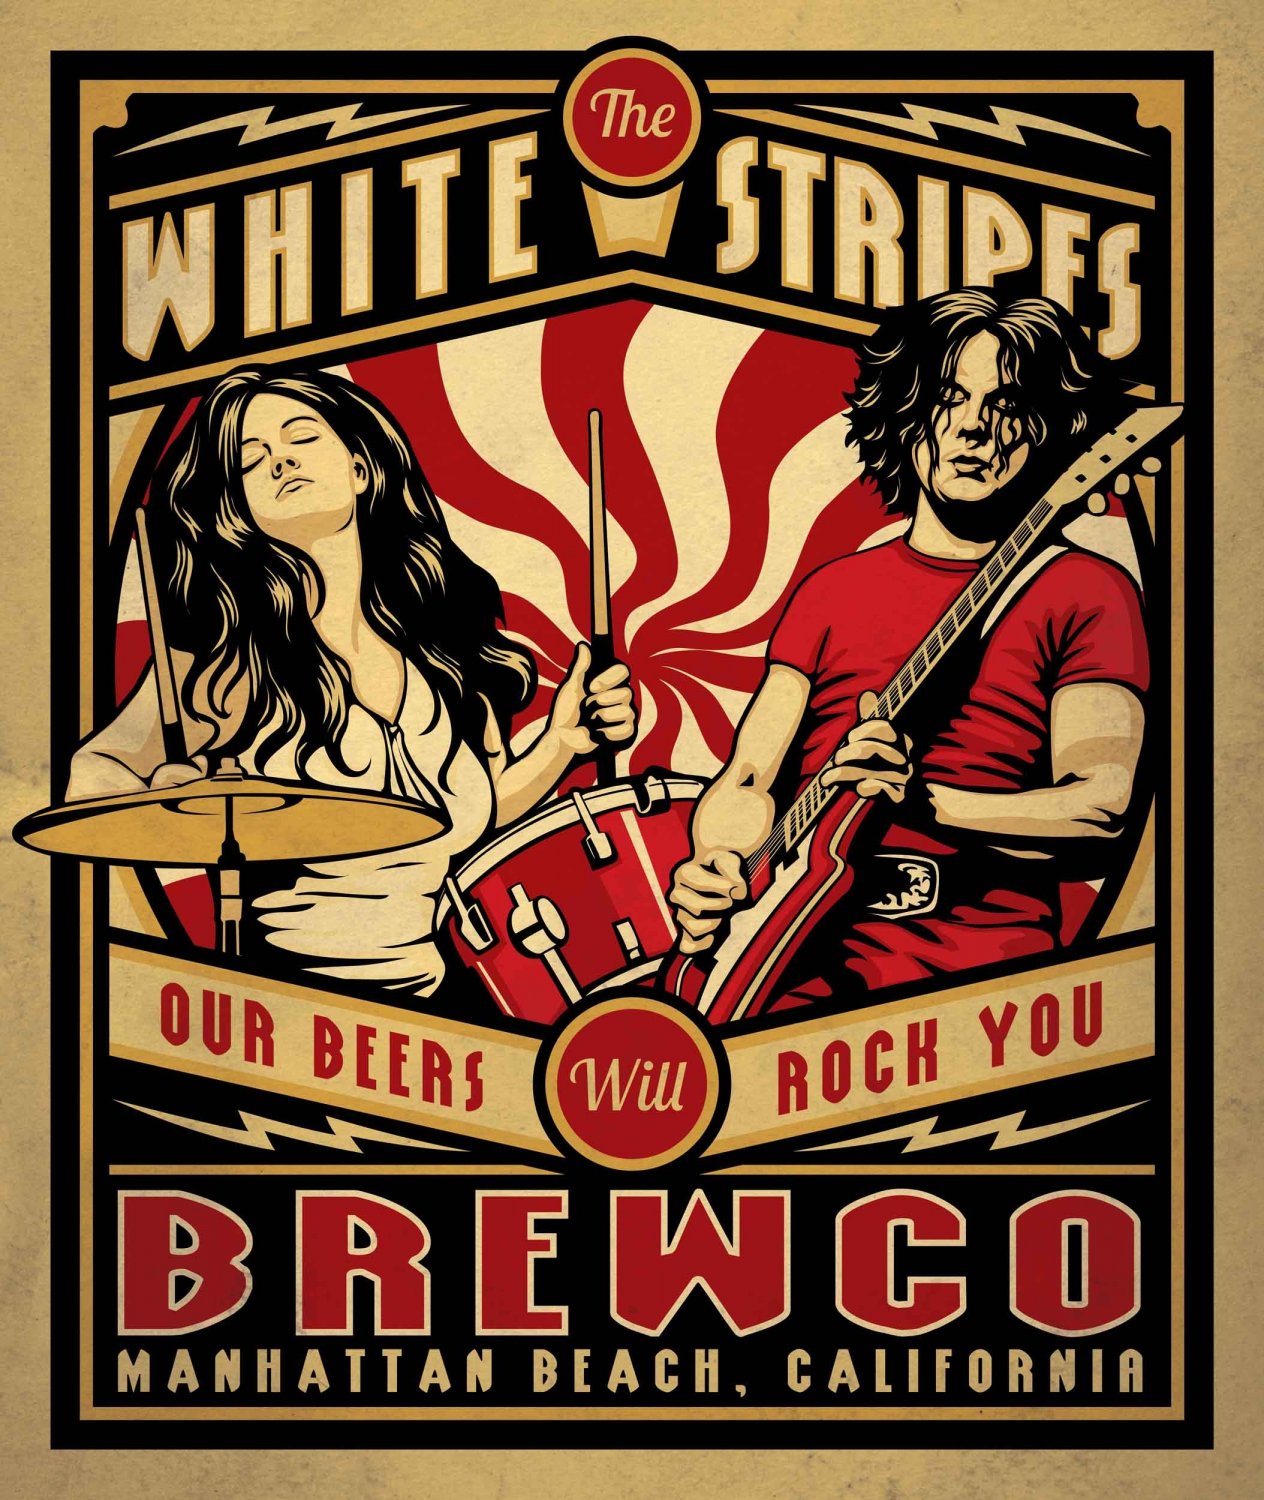 The White Stripes Our Beers Will Rock You Brewco Concert 13"x19" (32cm/49cm) Polyester Fabric Poster